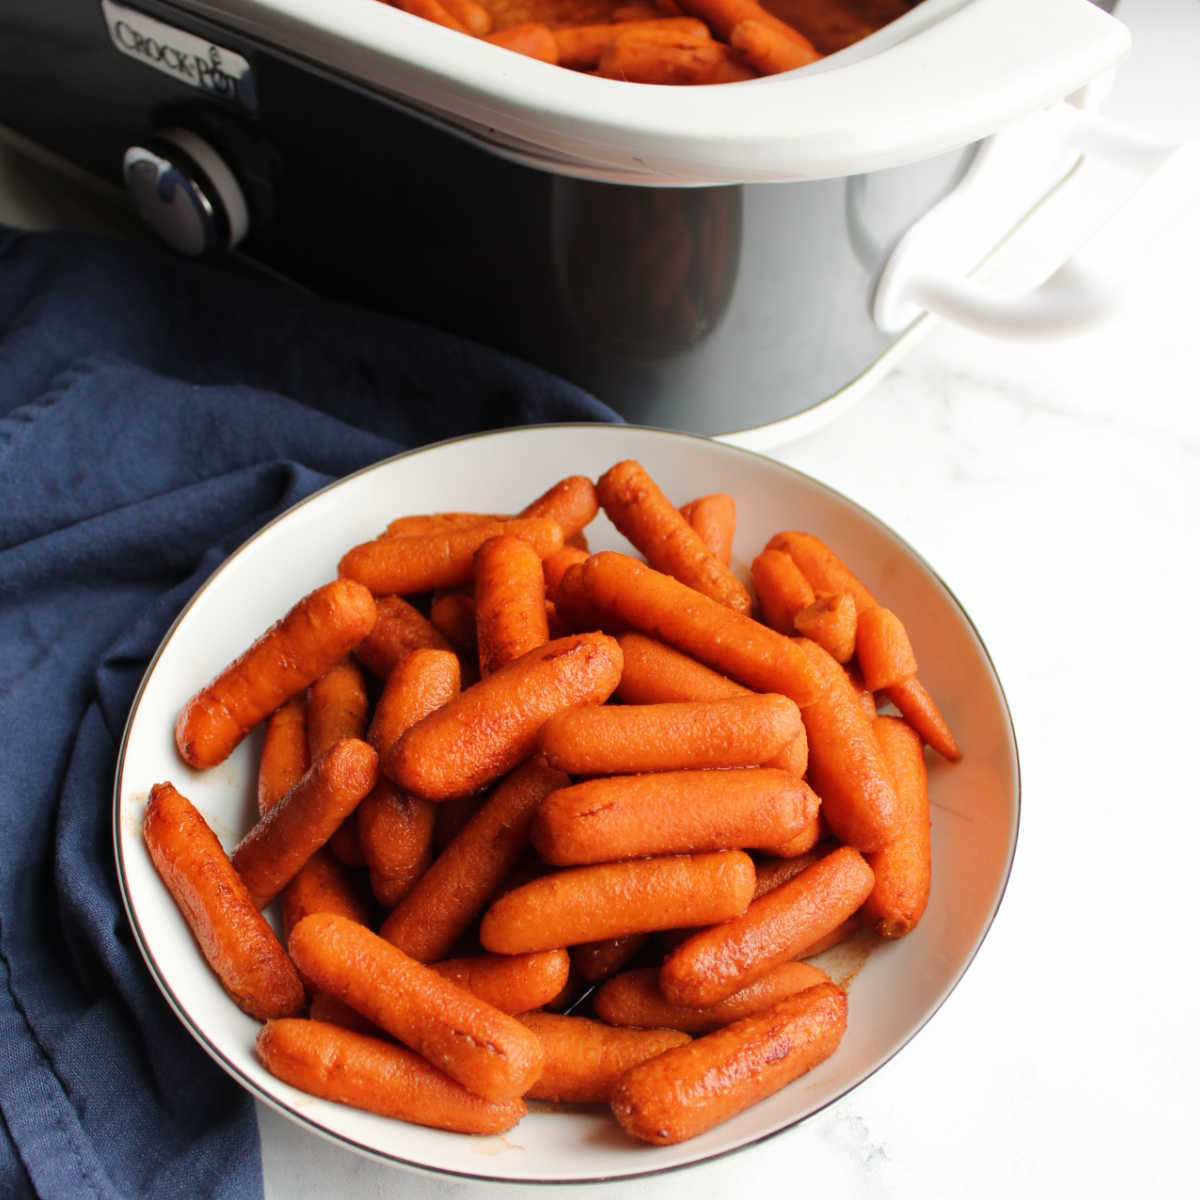 Serving bowl filled with carrots glazed in honey and cinnamon.